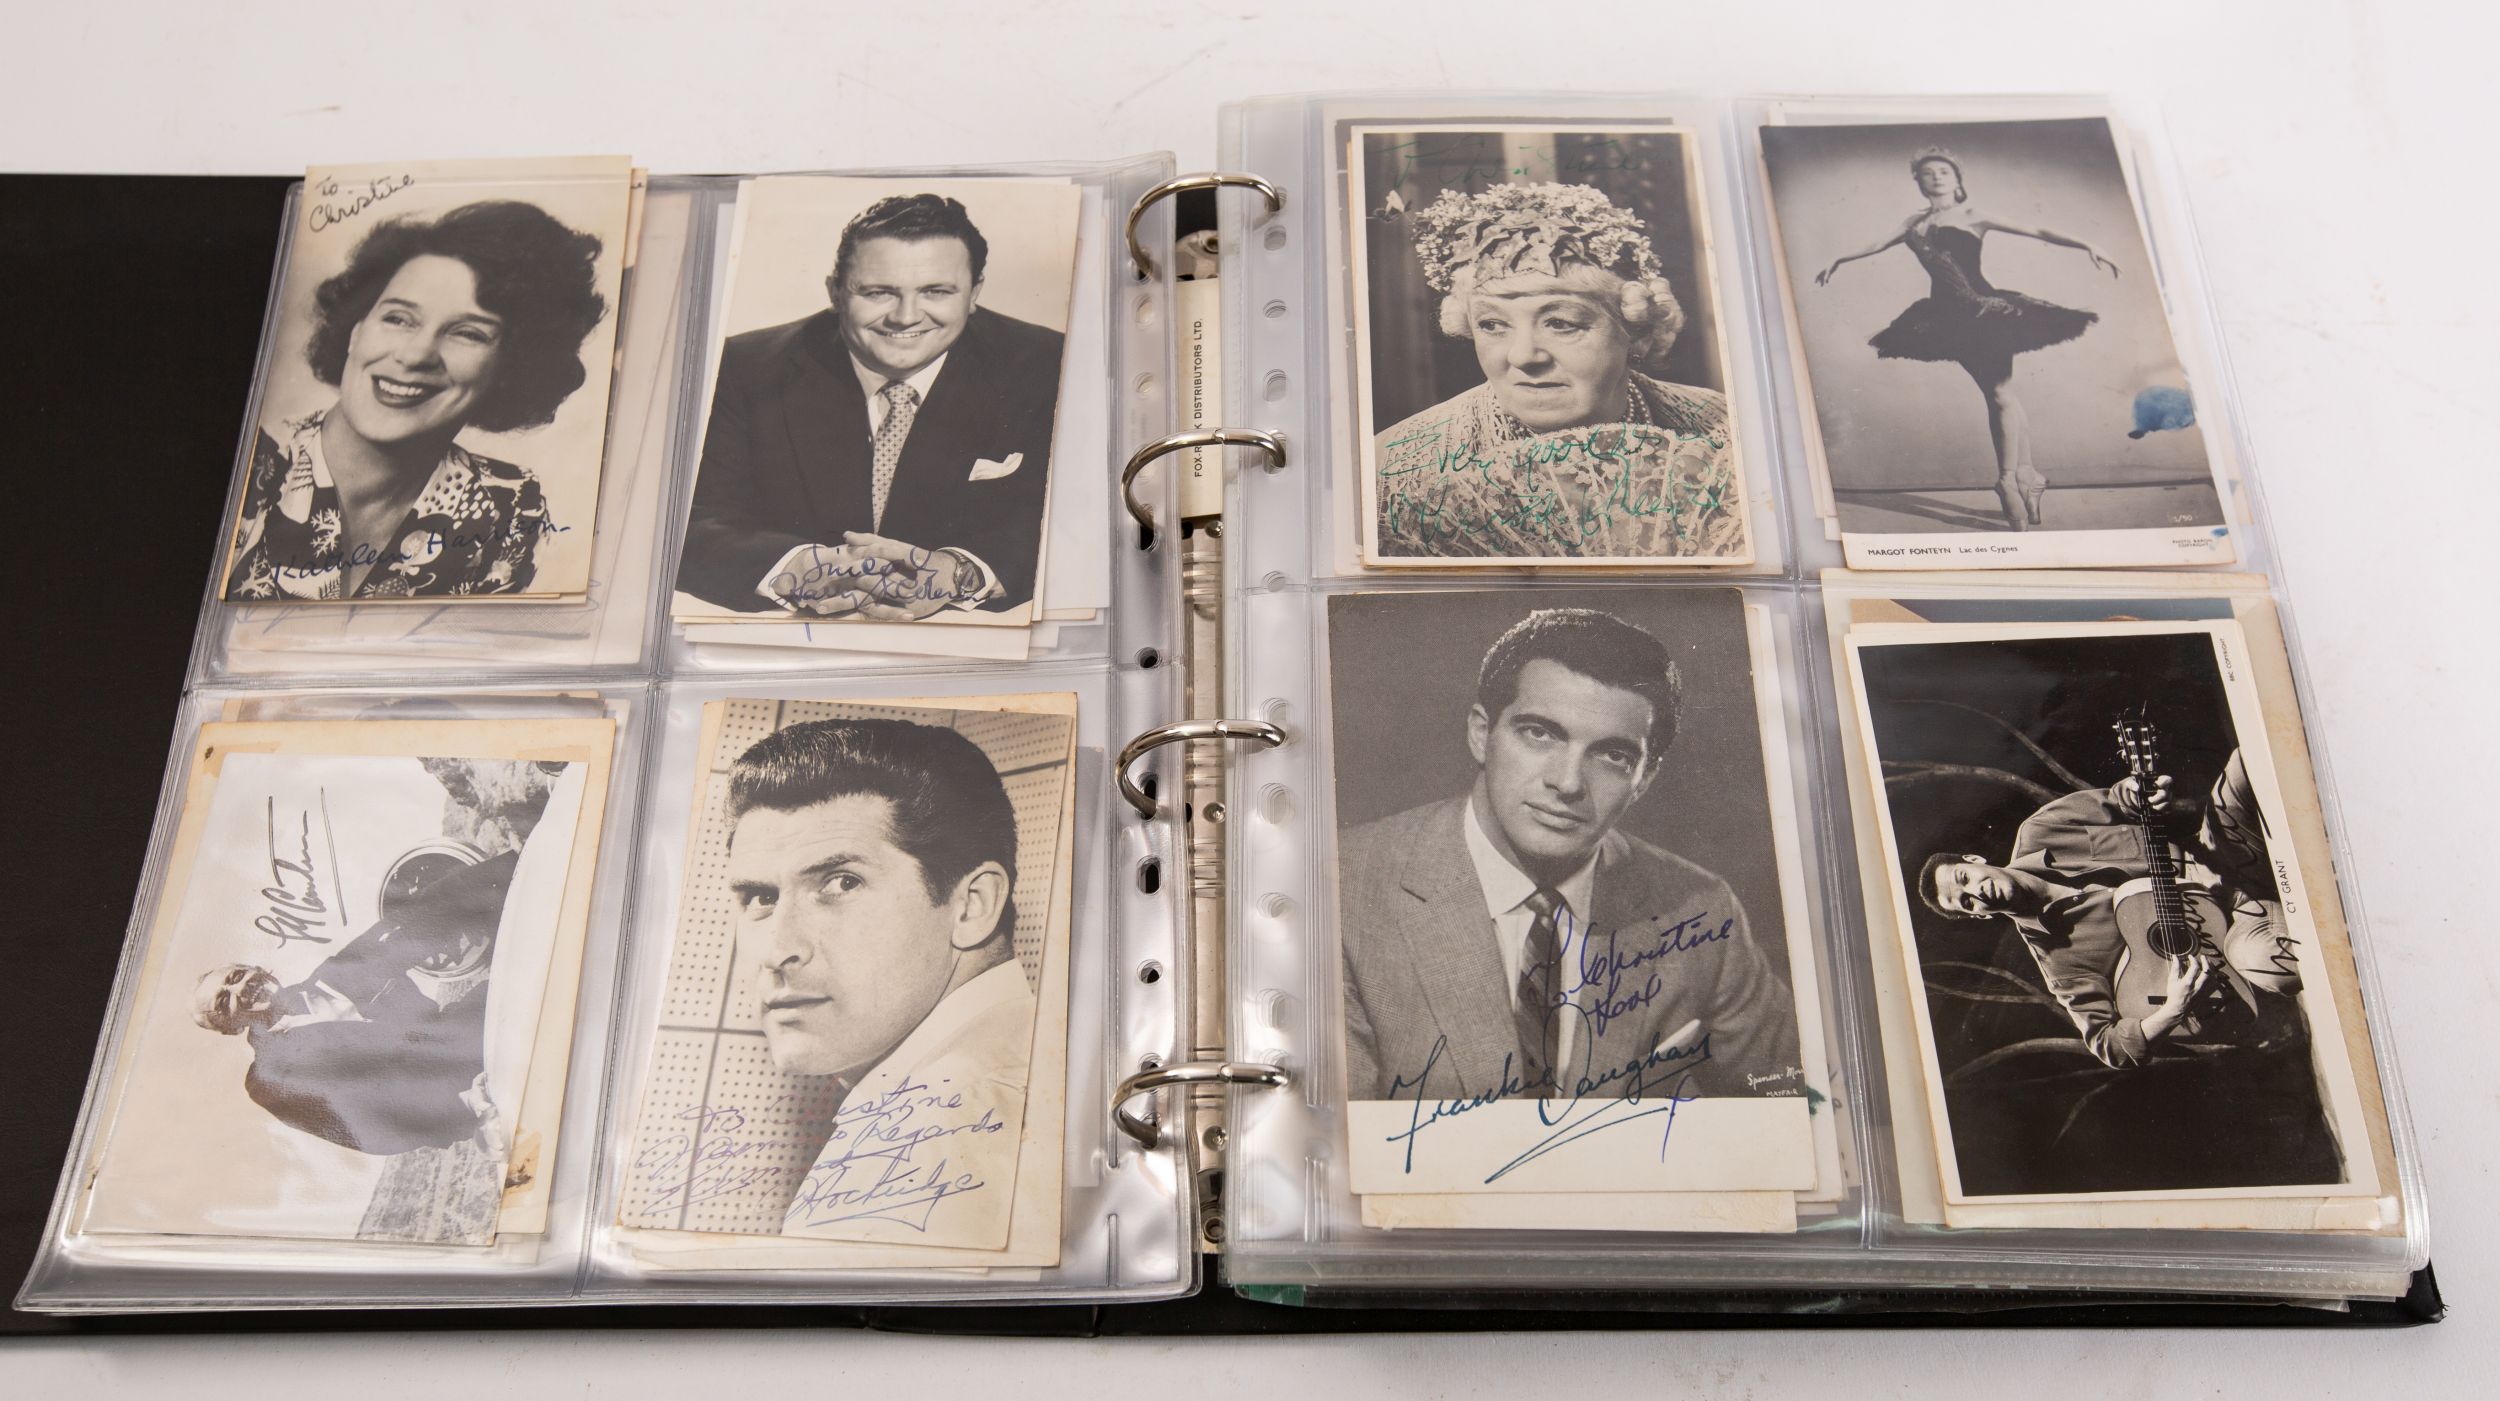 WITHDRAWN An impressive collection of autographs of British and American film and TV stars from the - Image 7 of 12